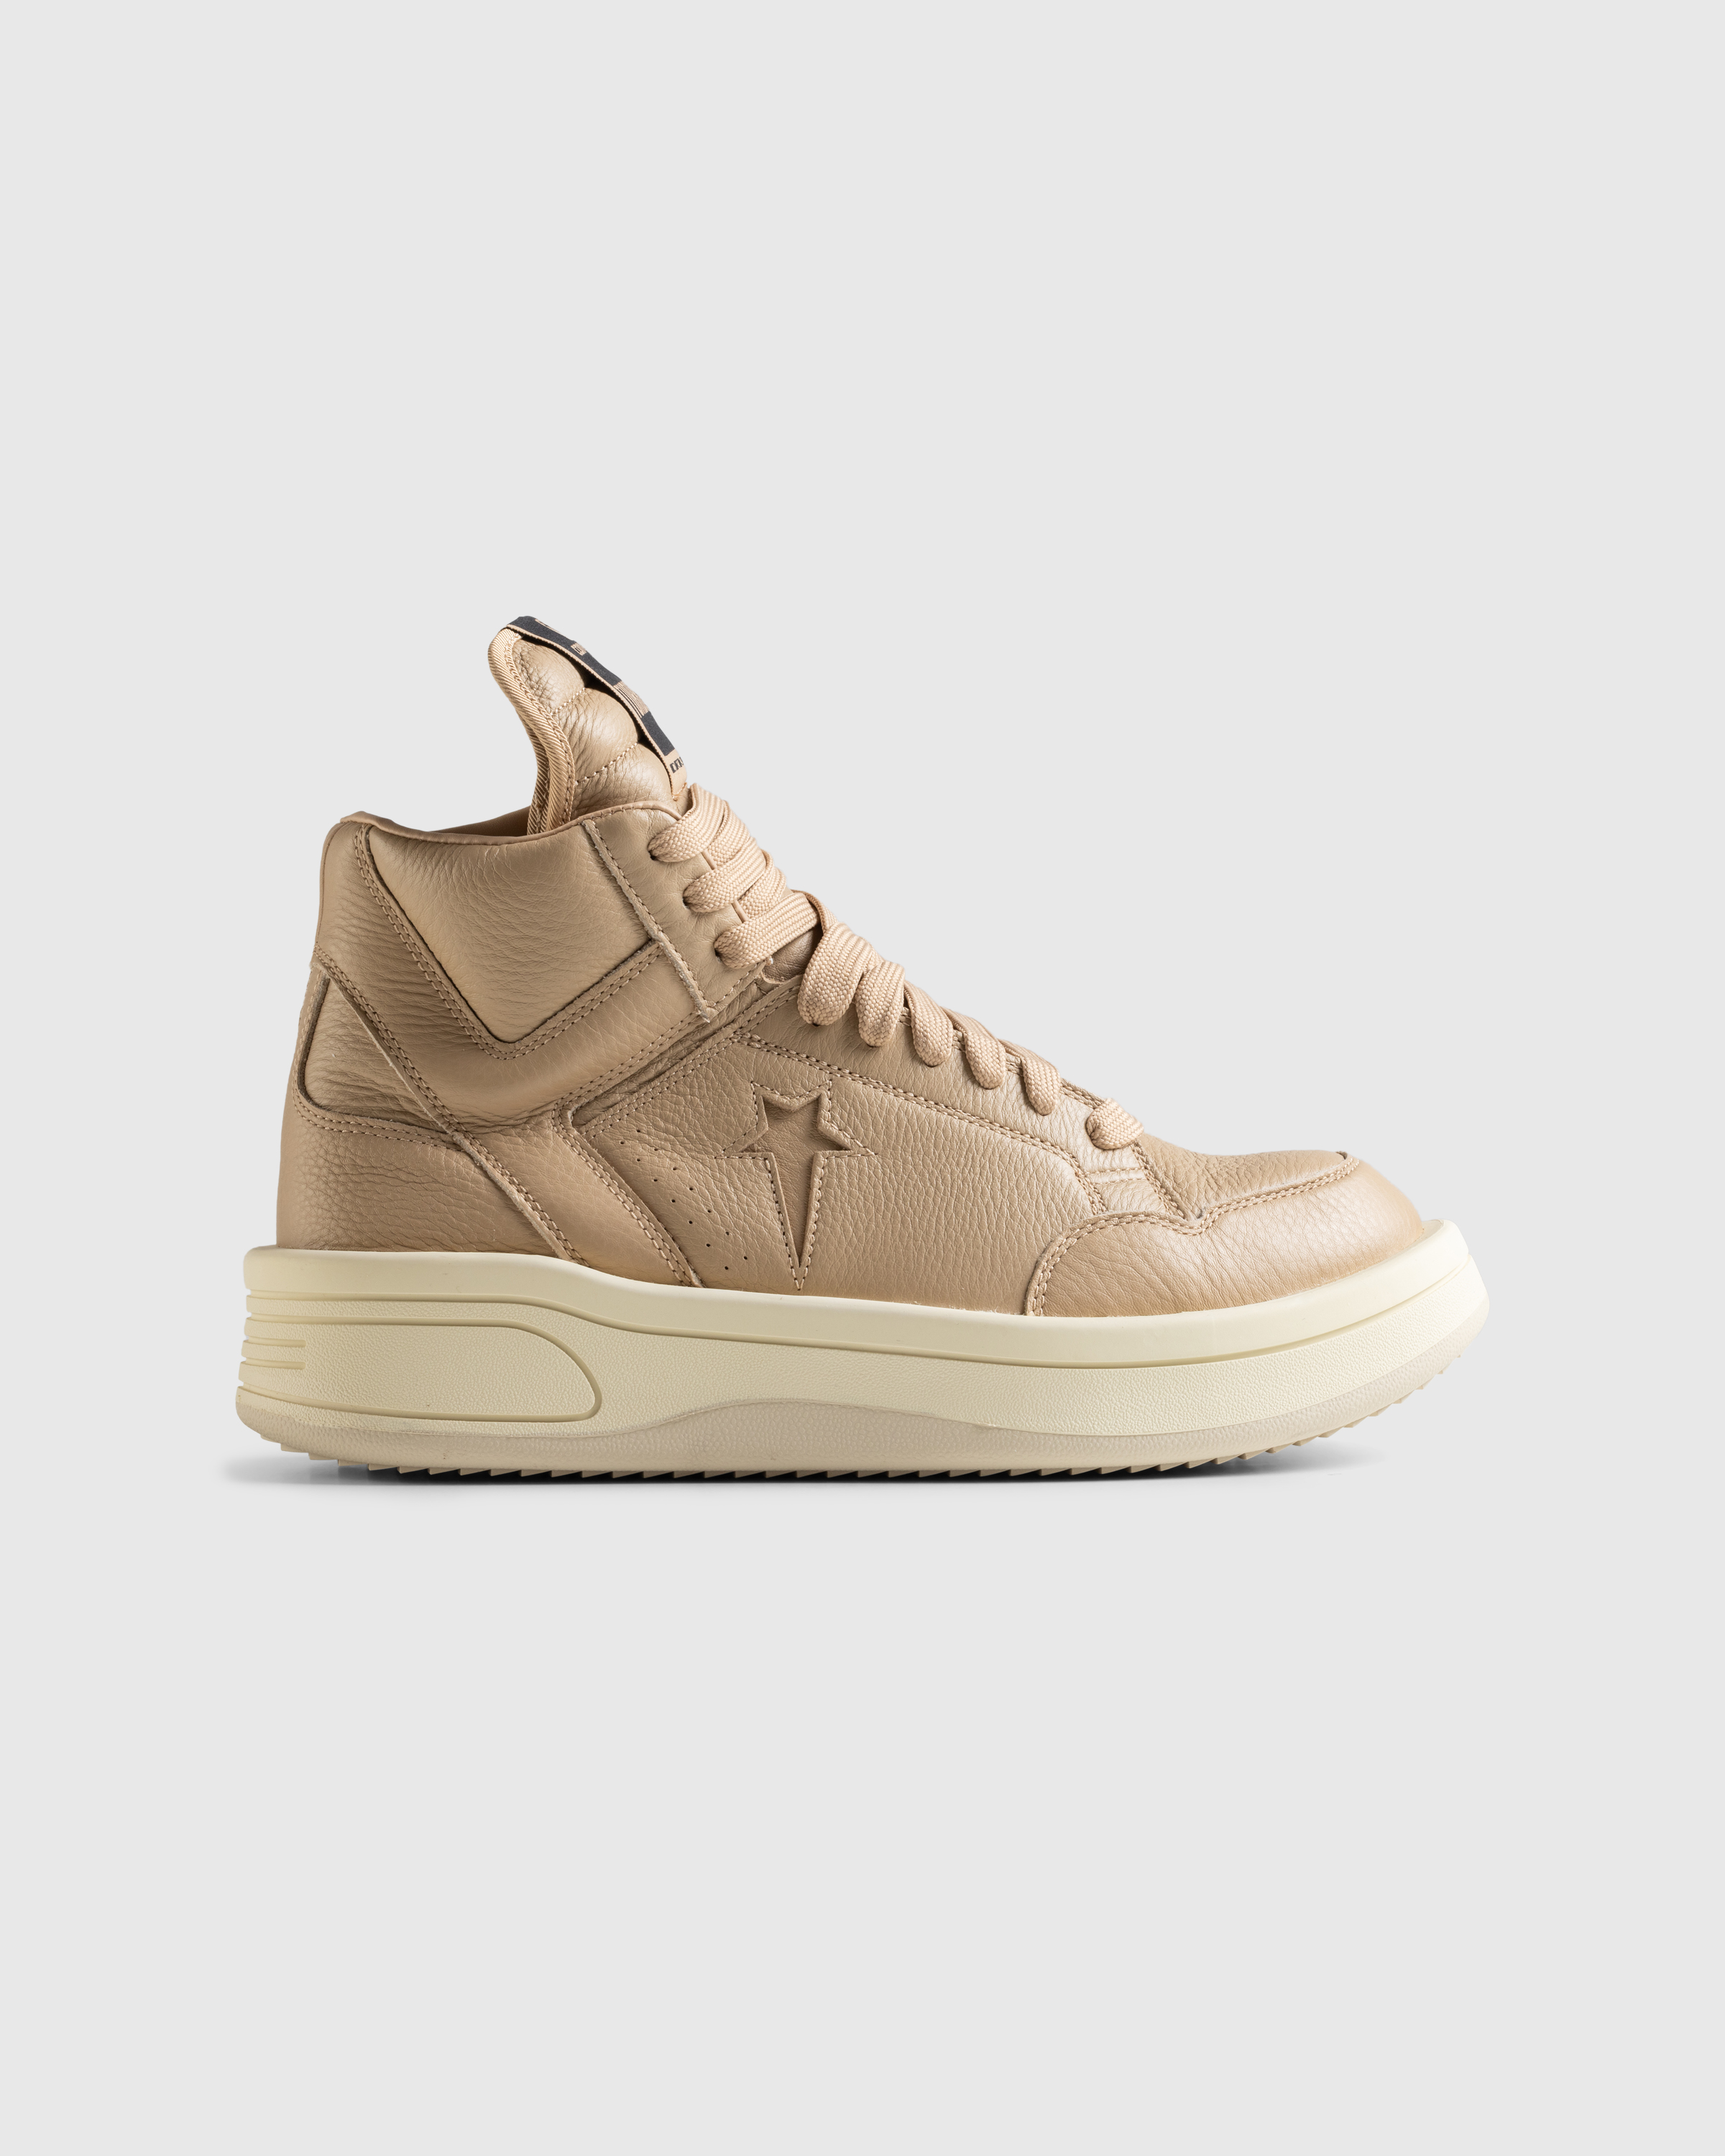 Rick Owens x Converse – TURBOWPN Cave  - High Top Sneakers - Brown - Image 1